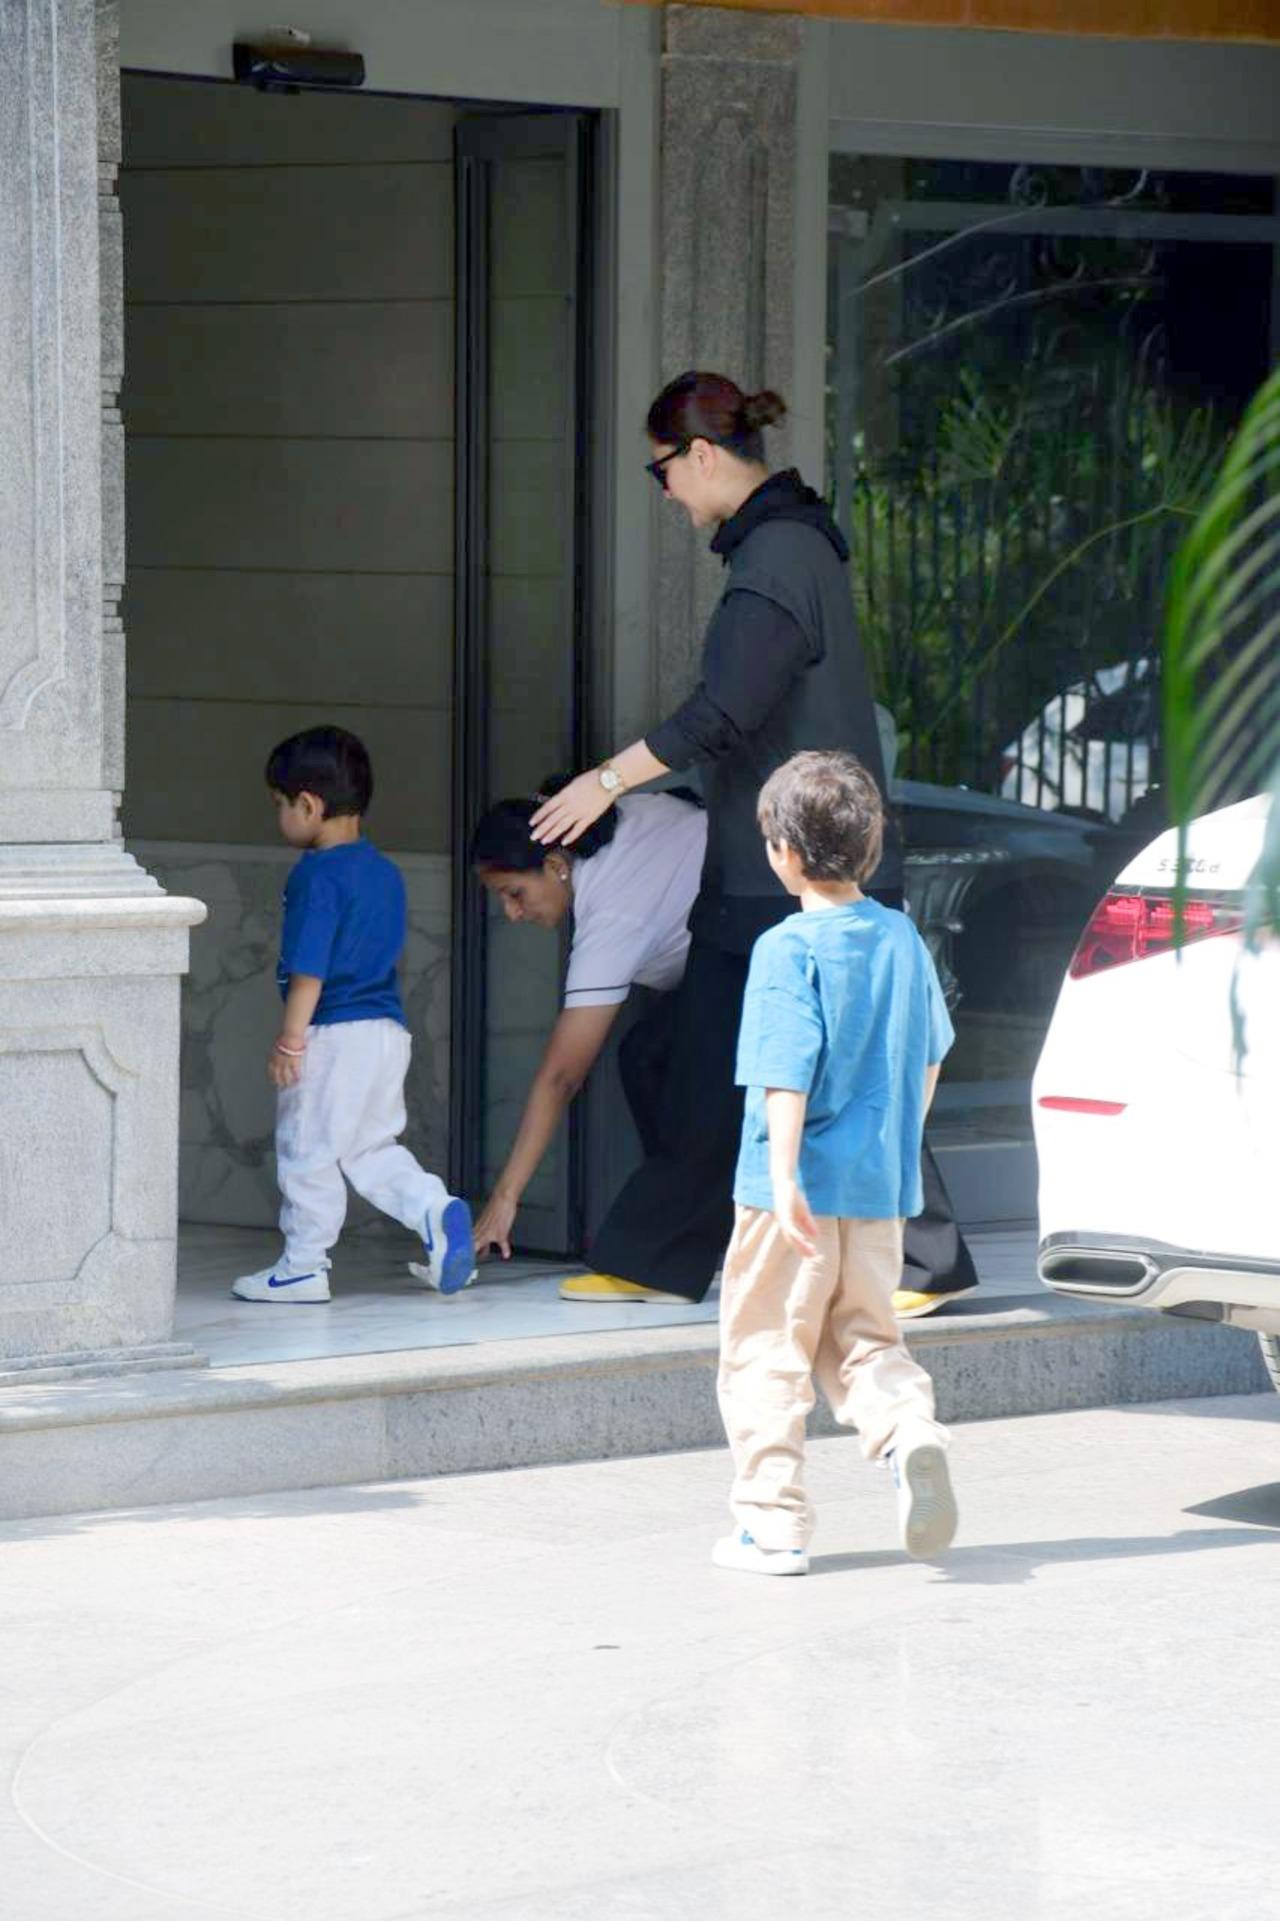 Kareena Kapoor Khan was spotted outside father Randhir Kapoor's house with her kids, Jeh and Taimur